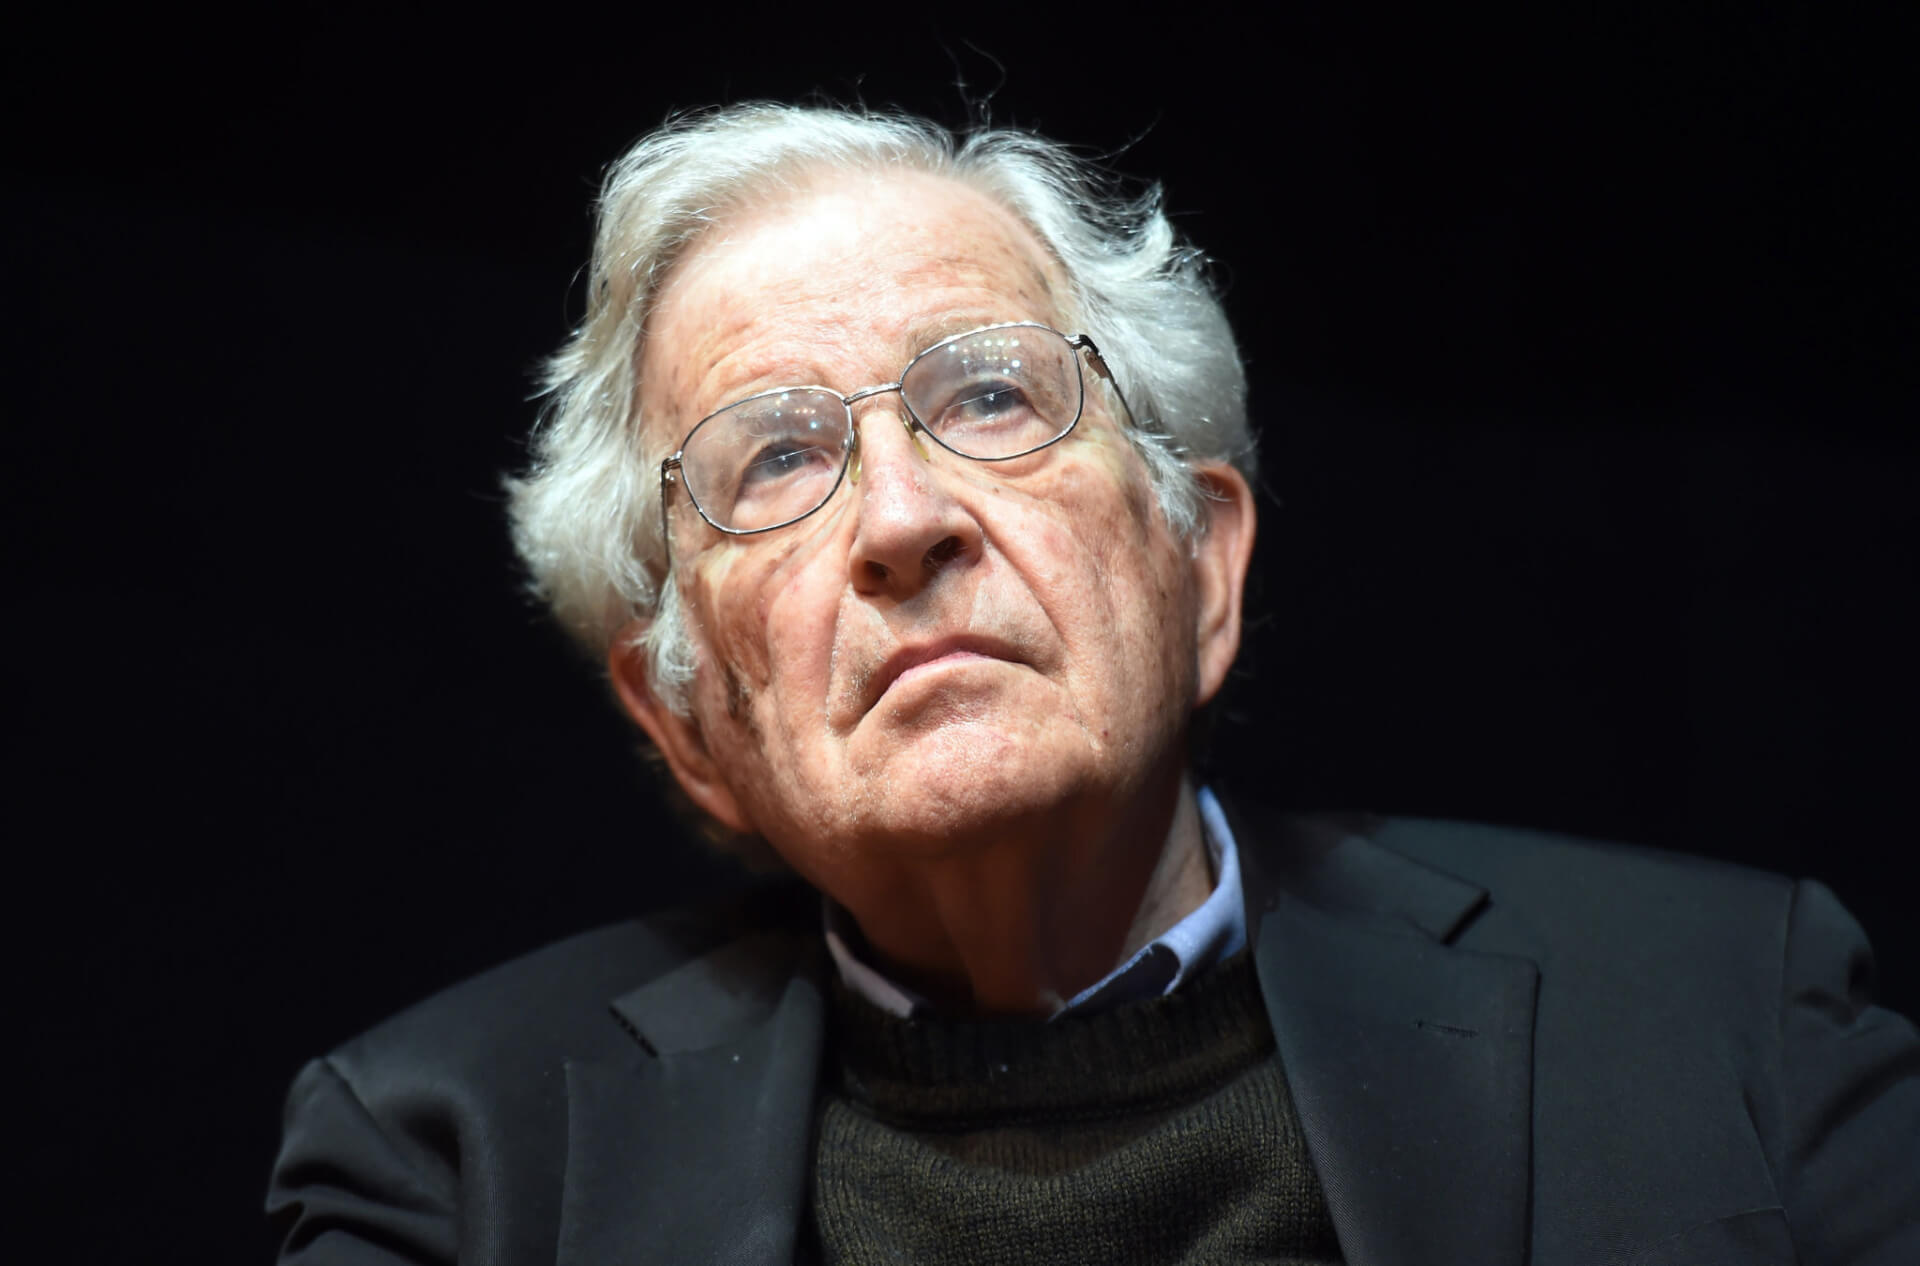 Chomsky Says US’ Eastward Expansion to Blame For Putin’s “Monstrous” War in Ukraine